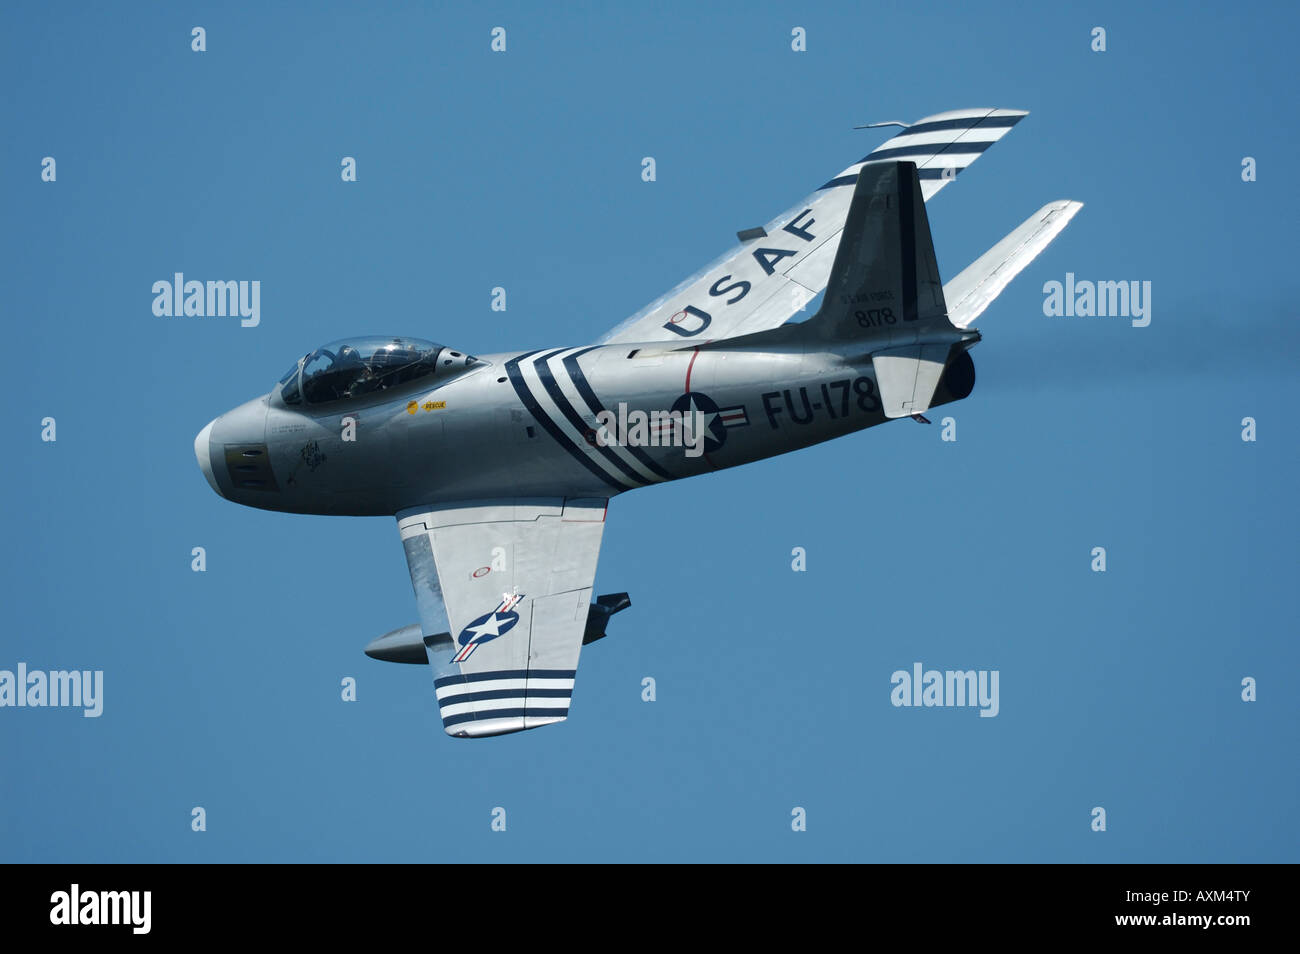 Old jet fighter North American F-86 Sabre used during Korea war, La Ferte Alais air show, France Stock Photo